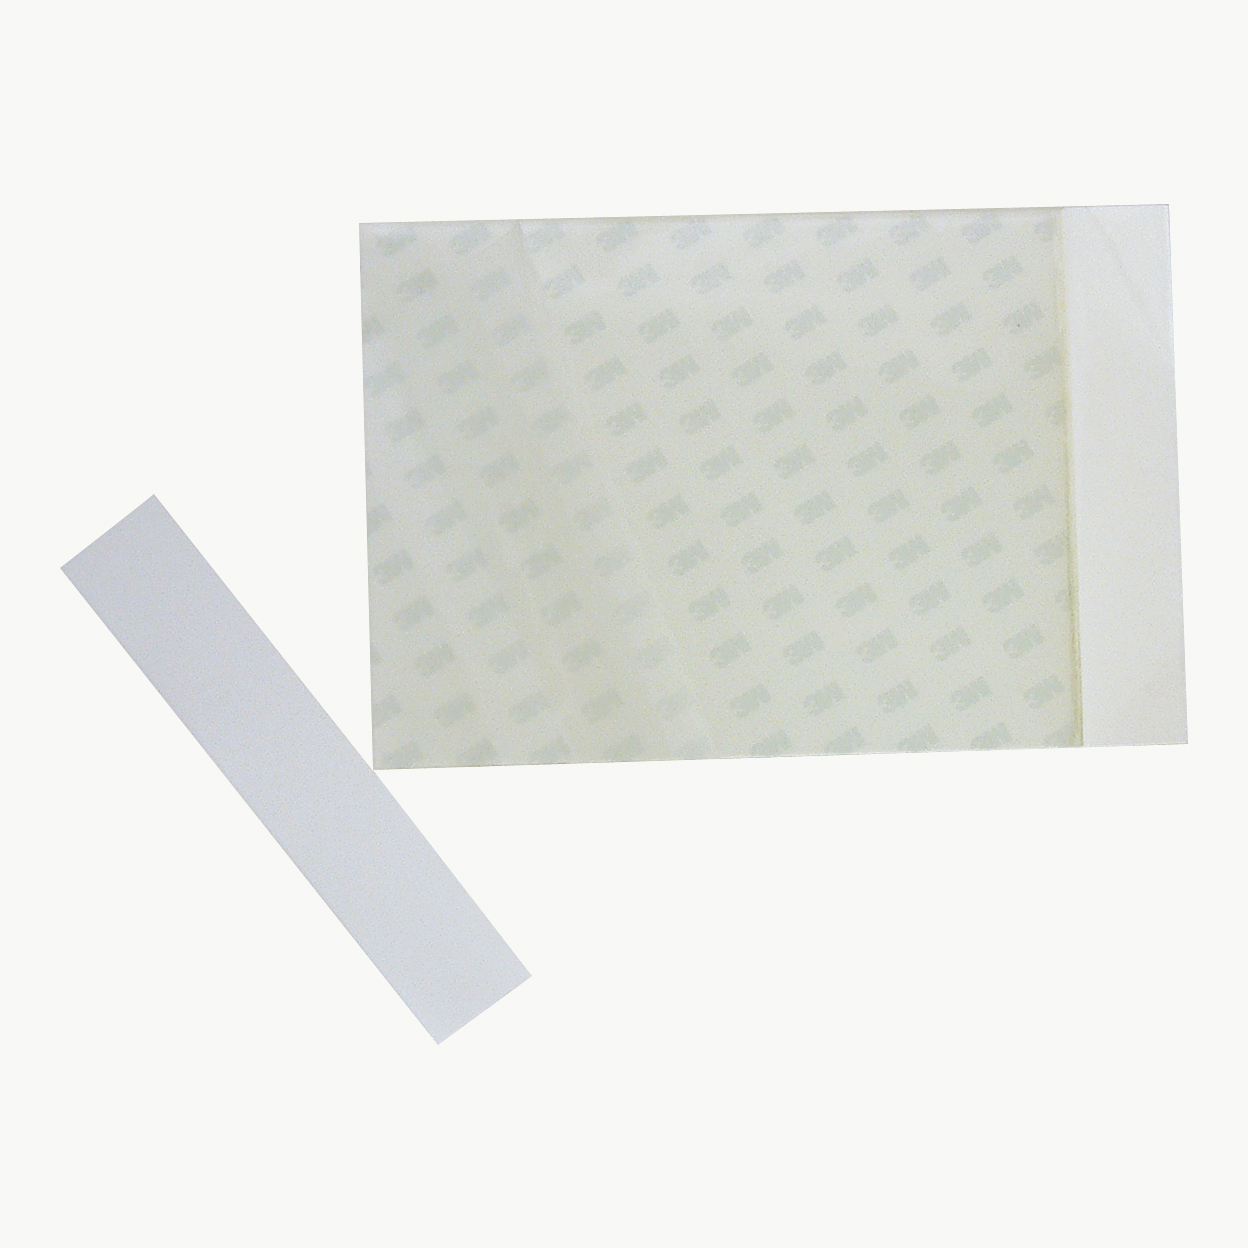 3M ScotchPad Scotch Packaging and Protection Tape Pads